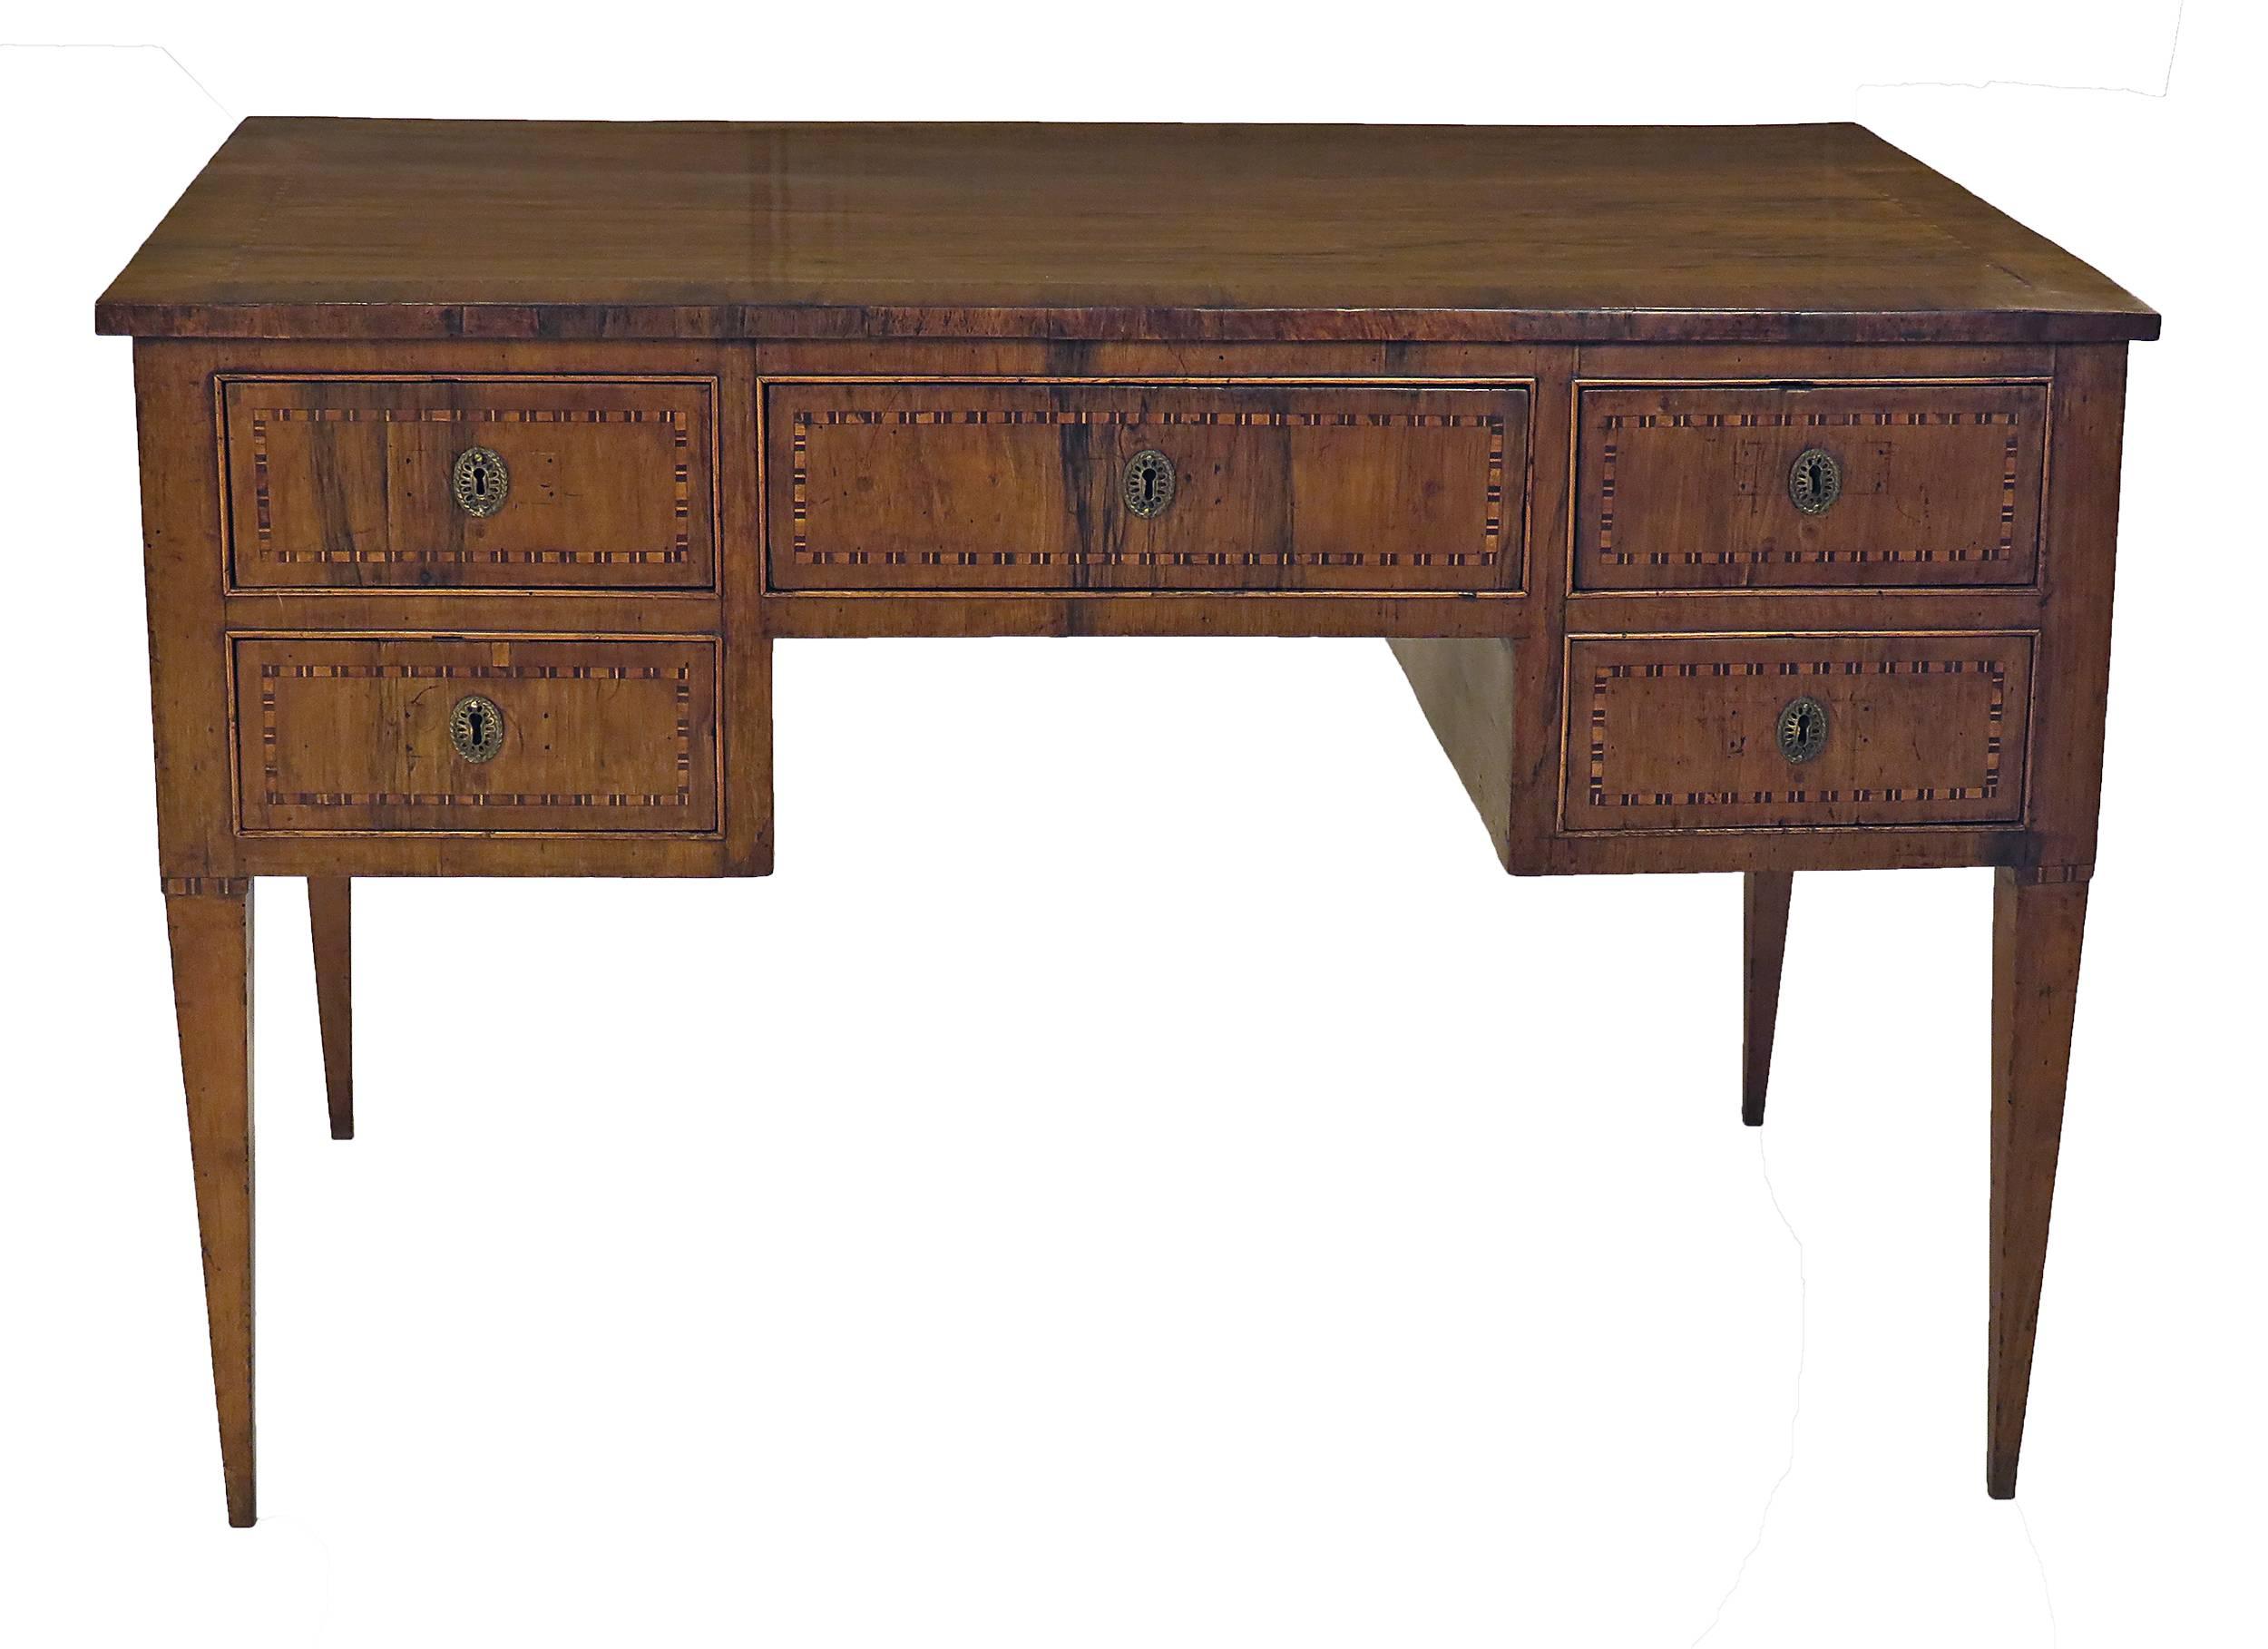 A handsome Italian walnut inlaid writing table or dressing table or desk made in the north about 1810 in the neoclassical manner. The desk has been tightened and polished with some small repairs to veneer. This piece is finished on all four sides so